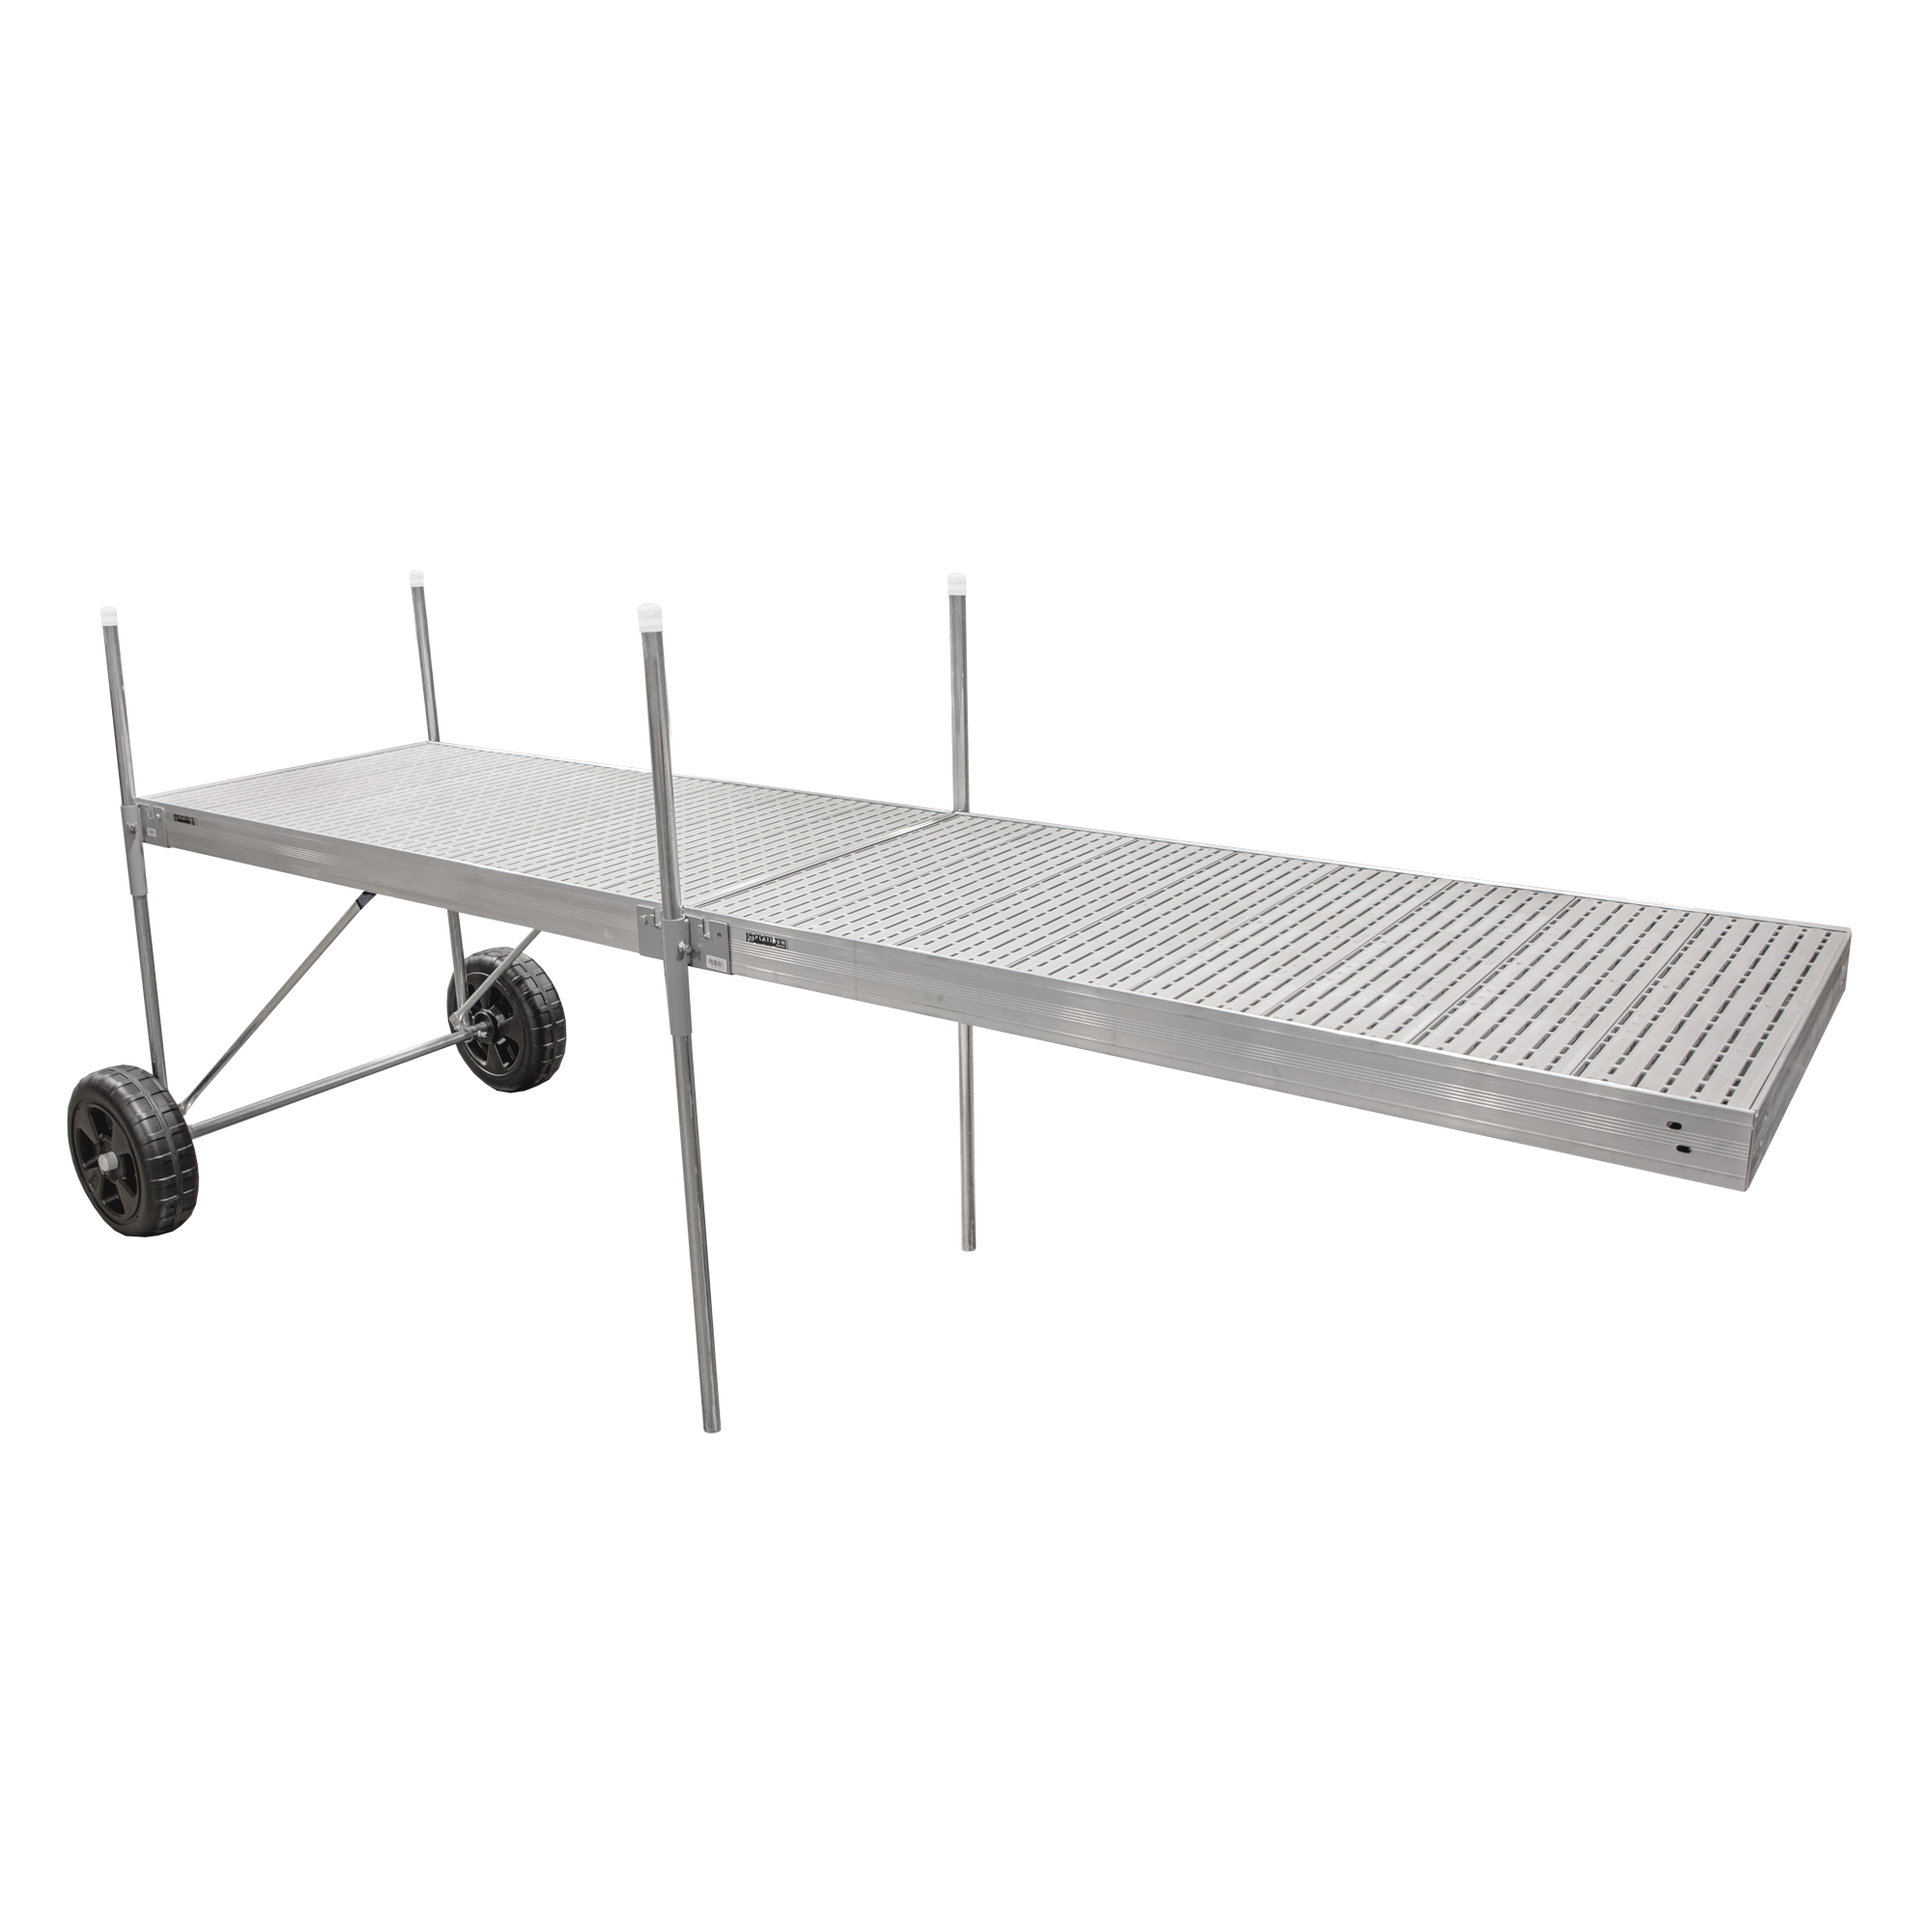 16 ft. Roll-In-Dock Straight System with Aluminum Frame and Titan Decking